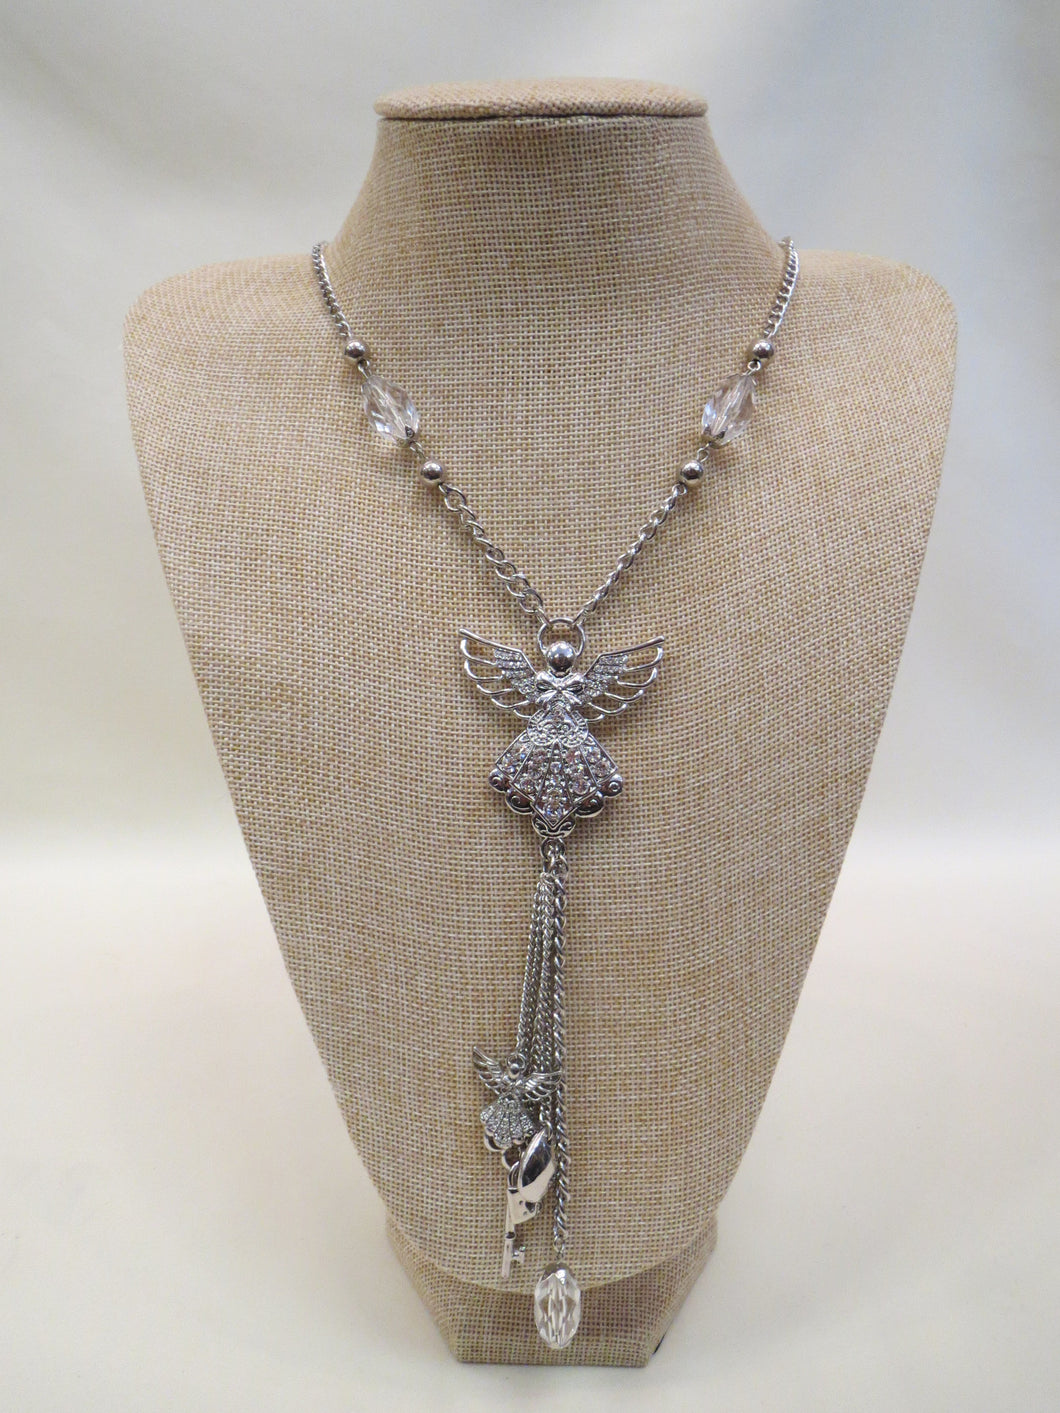 ADO Silver Angel Necklace with Charms | All Dec'd Out